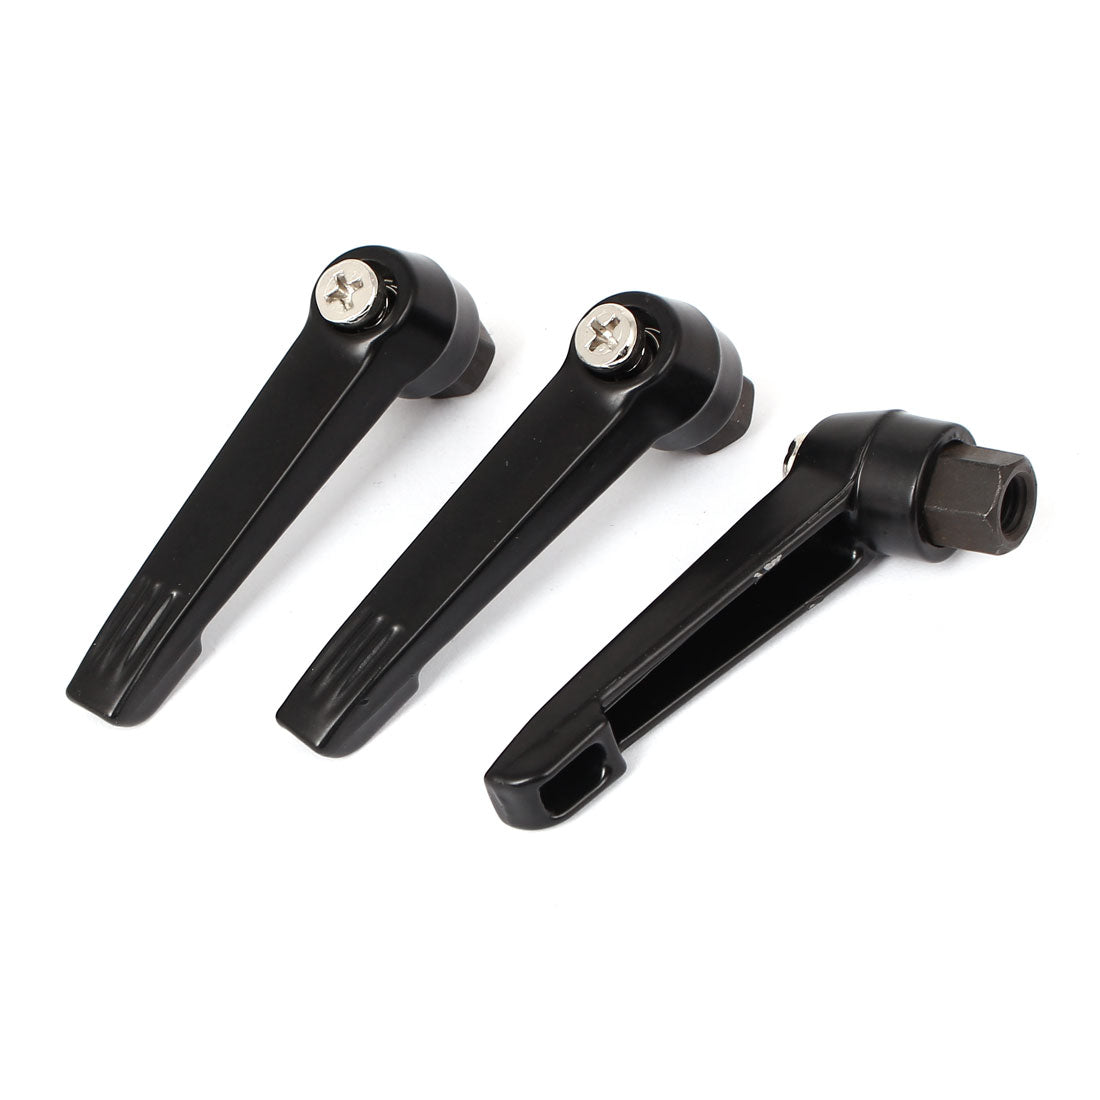 uxcell Uxcell M8 Female Thread Clamping Lever Adjustable Handle Grip 3pcs